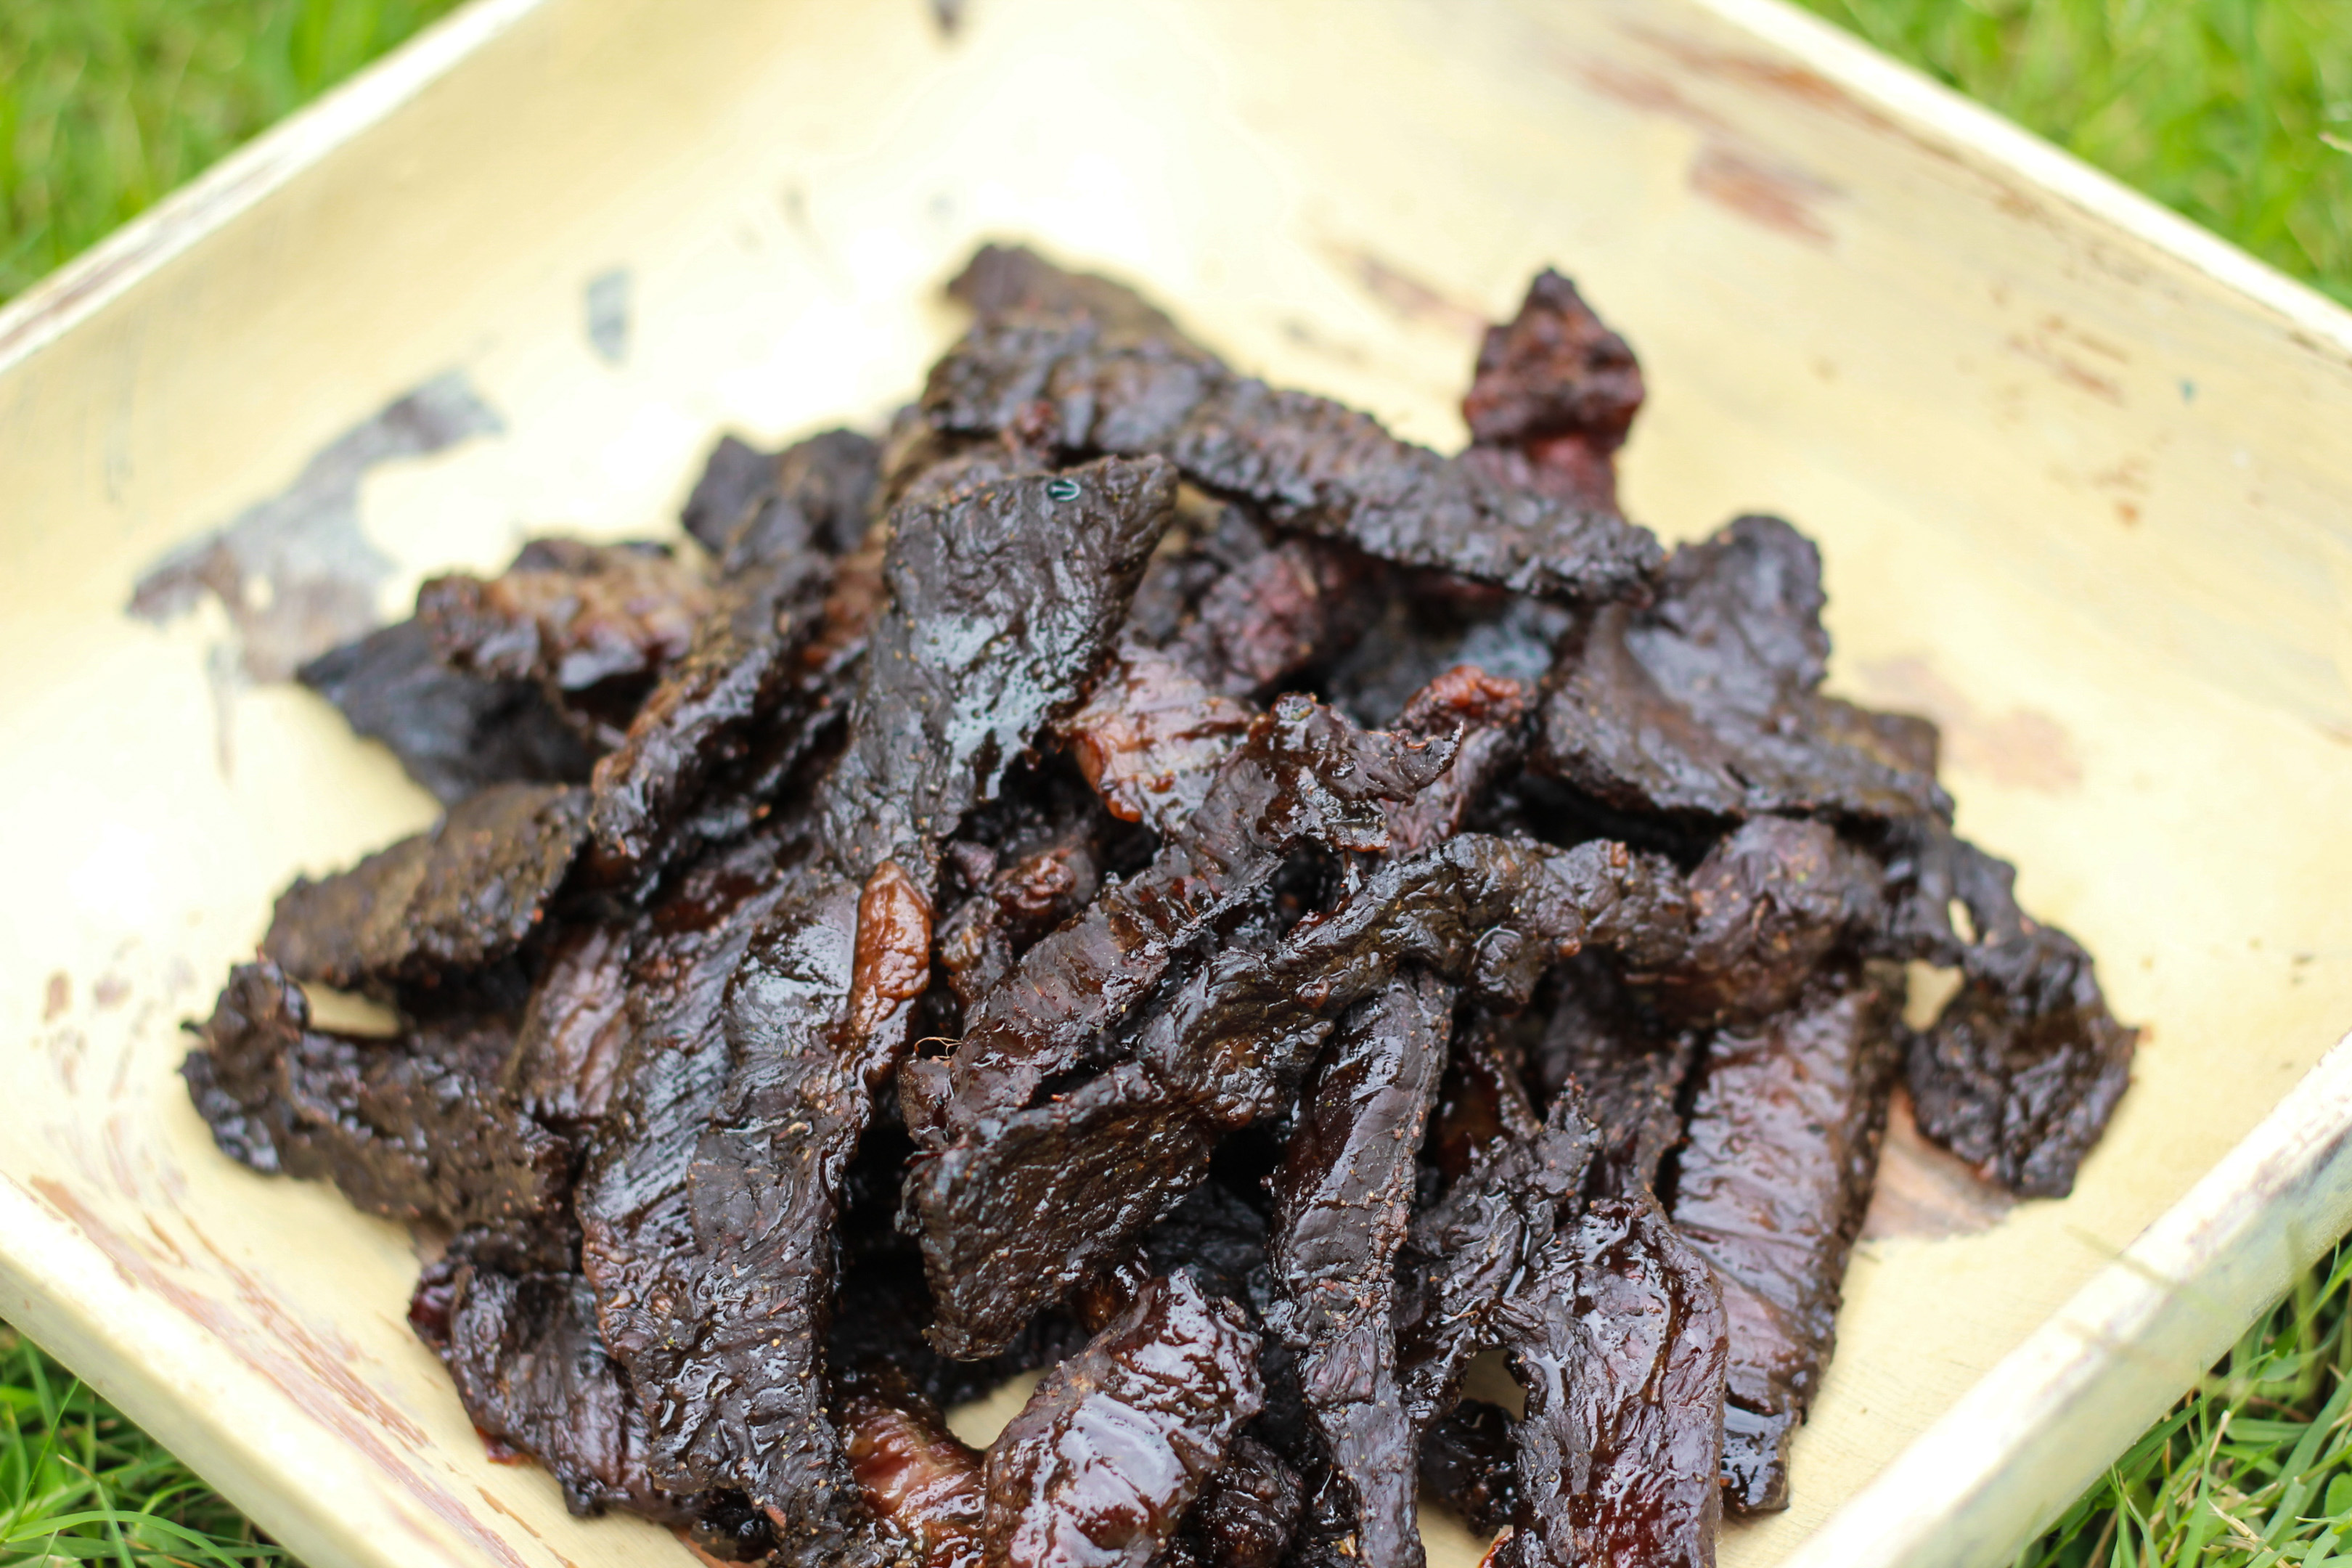 Homemade Peppered Beef Jerky Recipe and Video